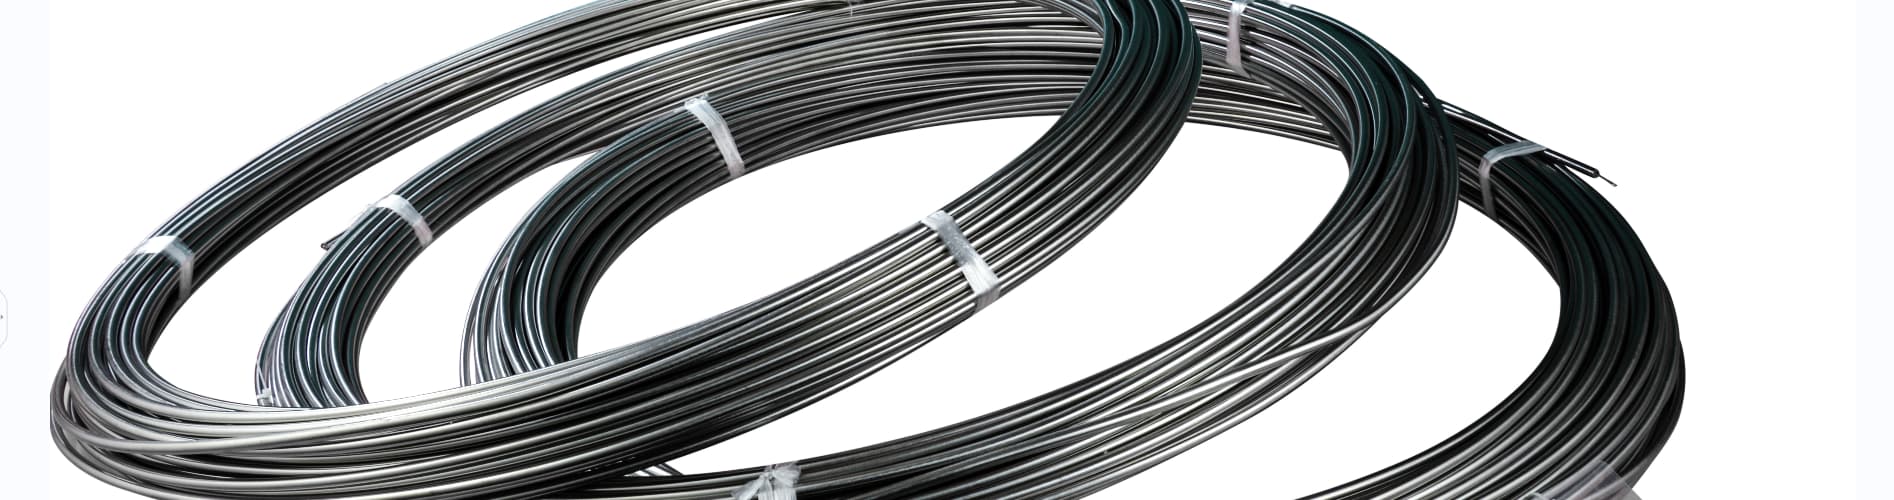 MICC cable